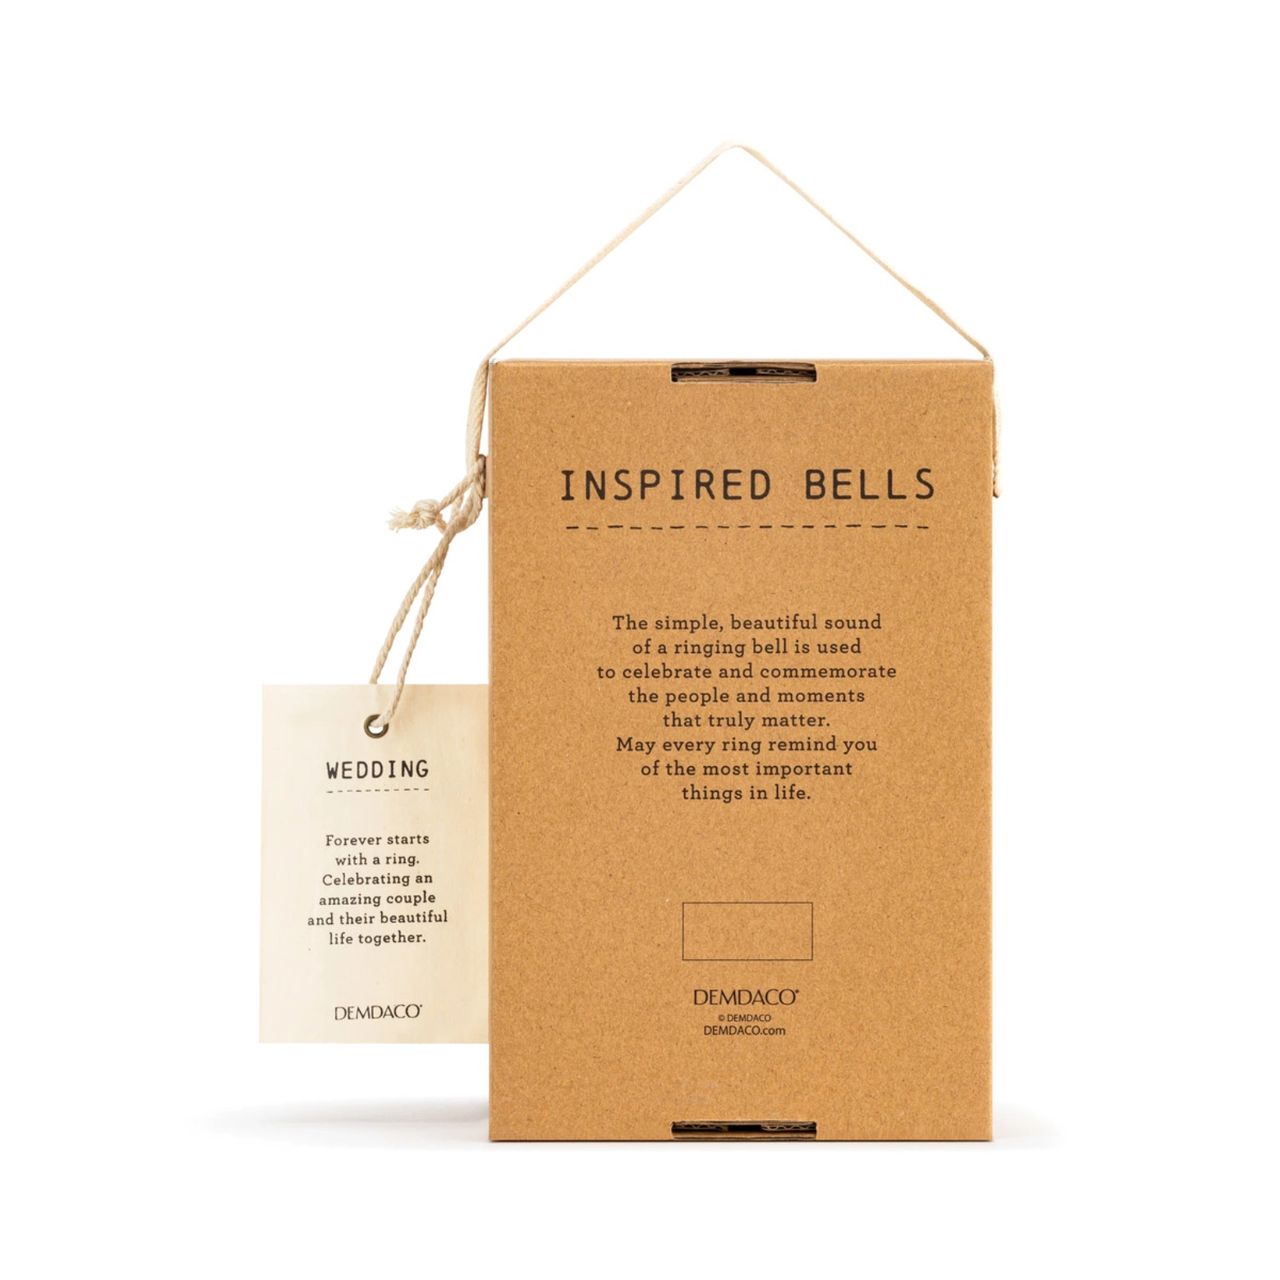 Inspired Bell - Wedding by Demdaco  Give beauty and relaxation with our Inspired Bells collection, a selection of artisan bells in soft, serene colours with soothing, gentle rings bearing sentiments of faith and love. Our Inspired Bell - Wedding is a ceramic indoor/outdoor bell in white with a pull made of two golden rings. The sentiment on the bell reads, "May every ring remind you of the day two became one… and the promise you made to love each other. Happy forever after."